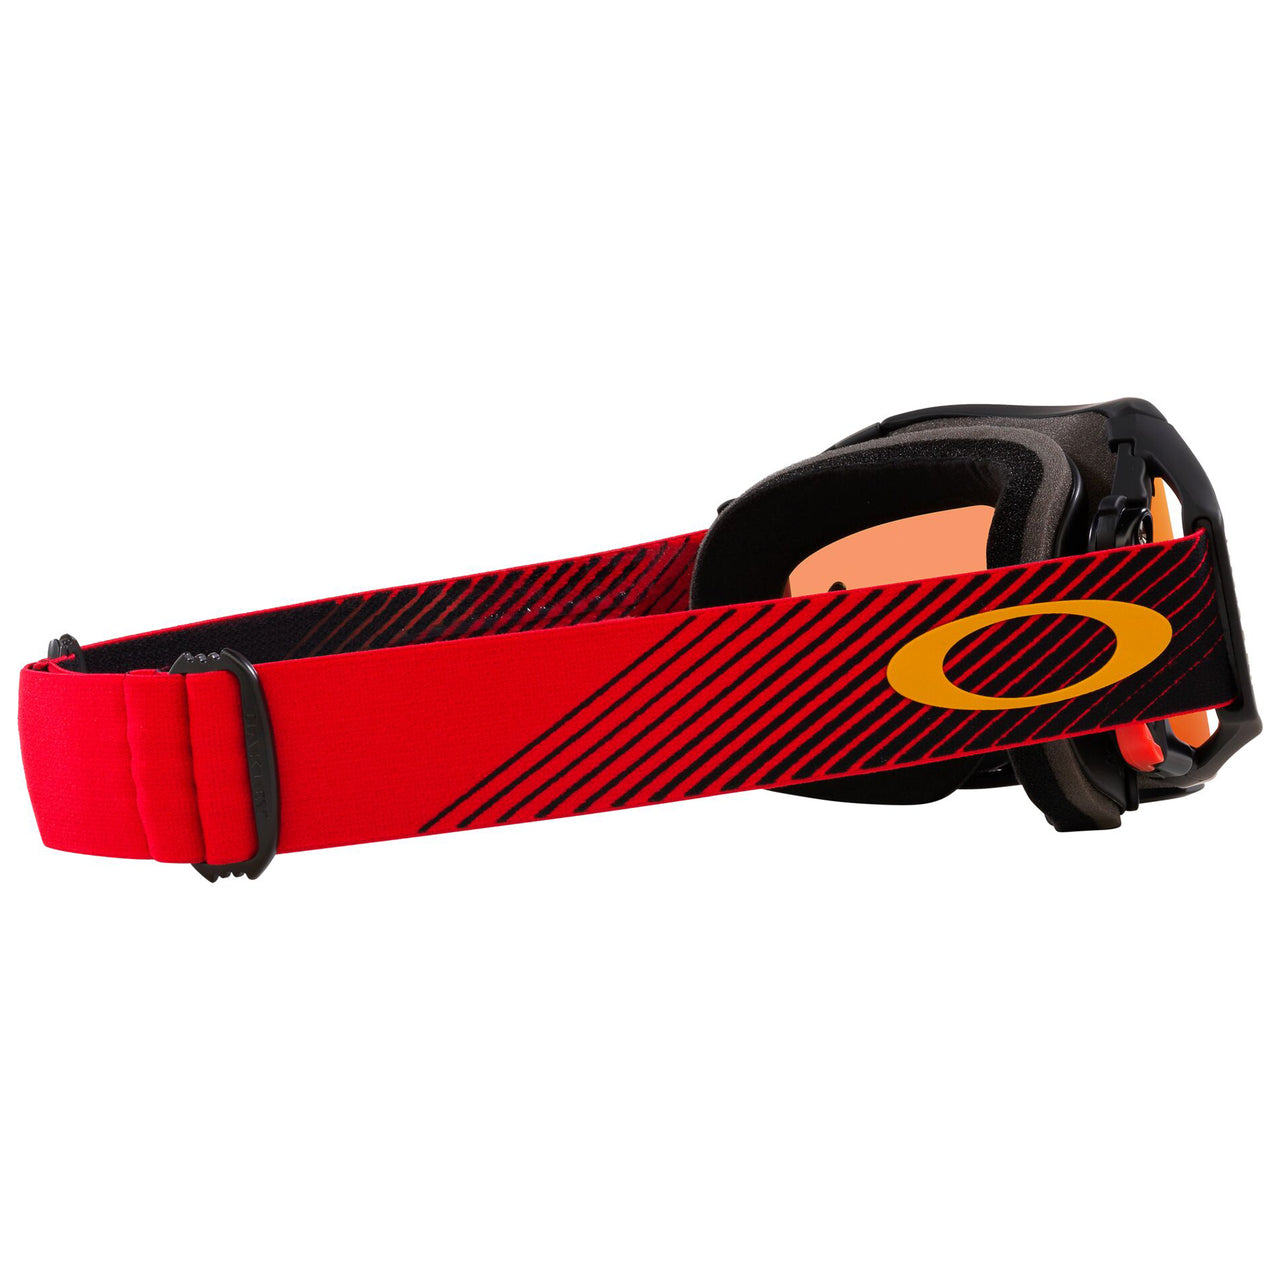 Oakley Airbrake MX Goggle Red Flow - Prizm Torch Lens